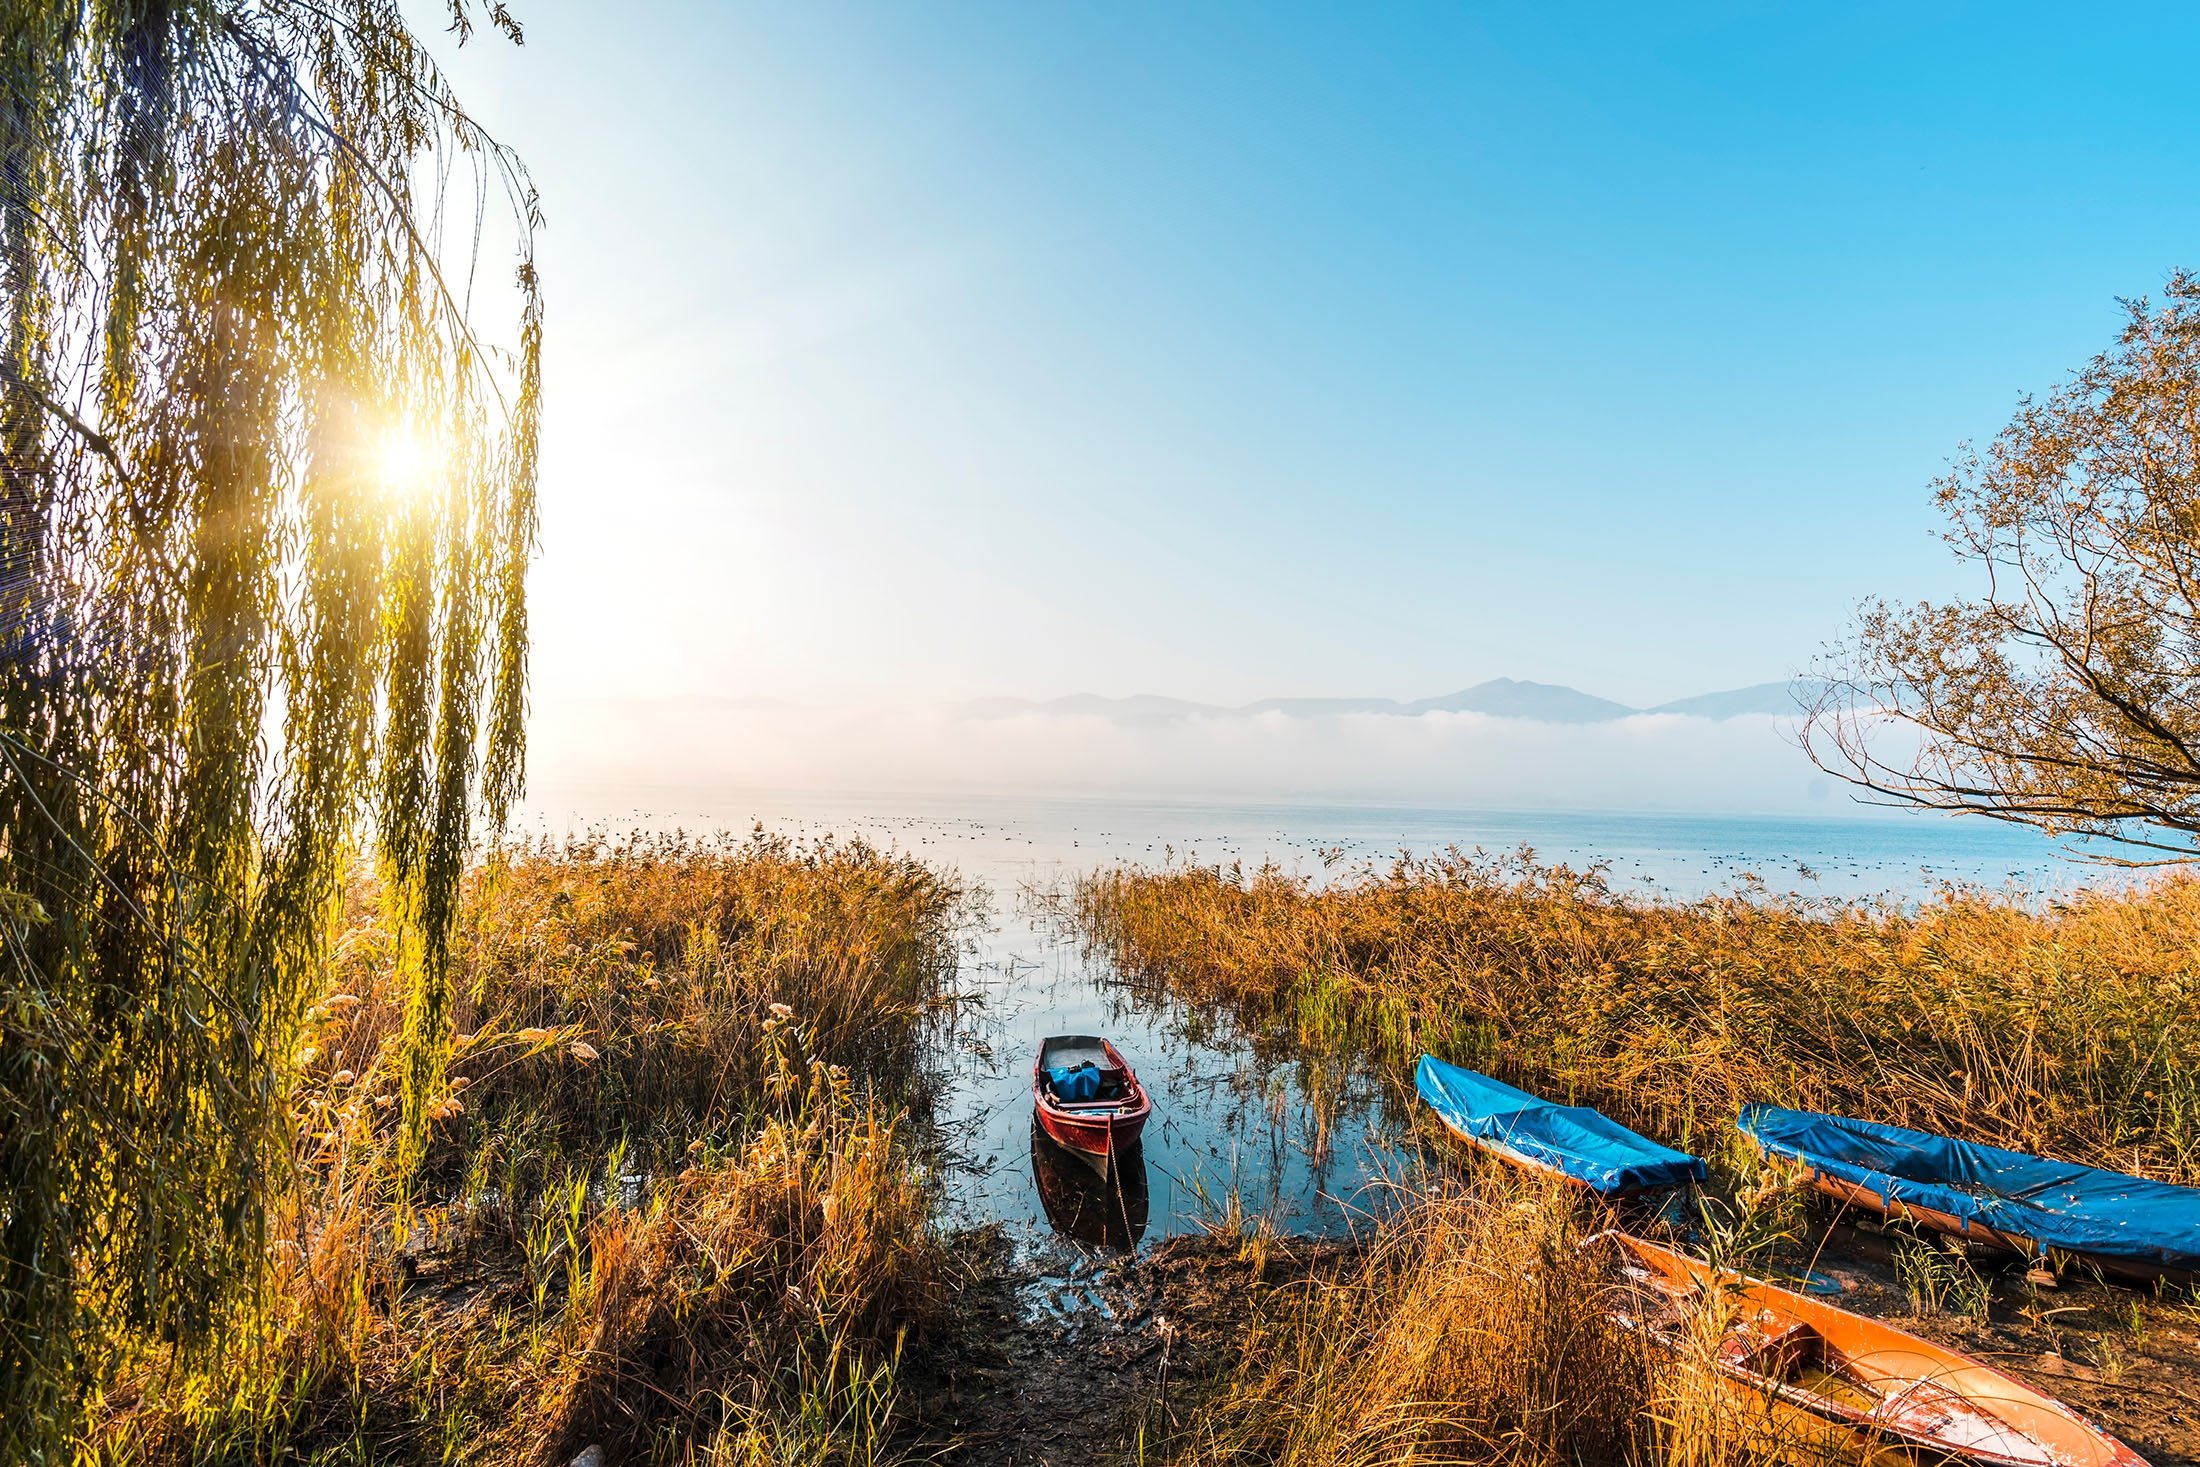 Lake Sapanca is a short ride from the major city of Istanbul for a trip in autumn, in Sakarya, Türkiye. (Shutterstock Photo)